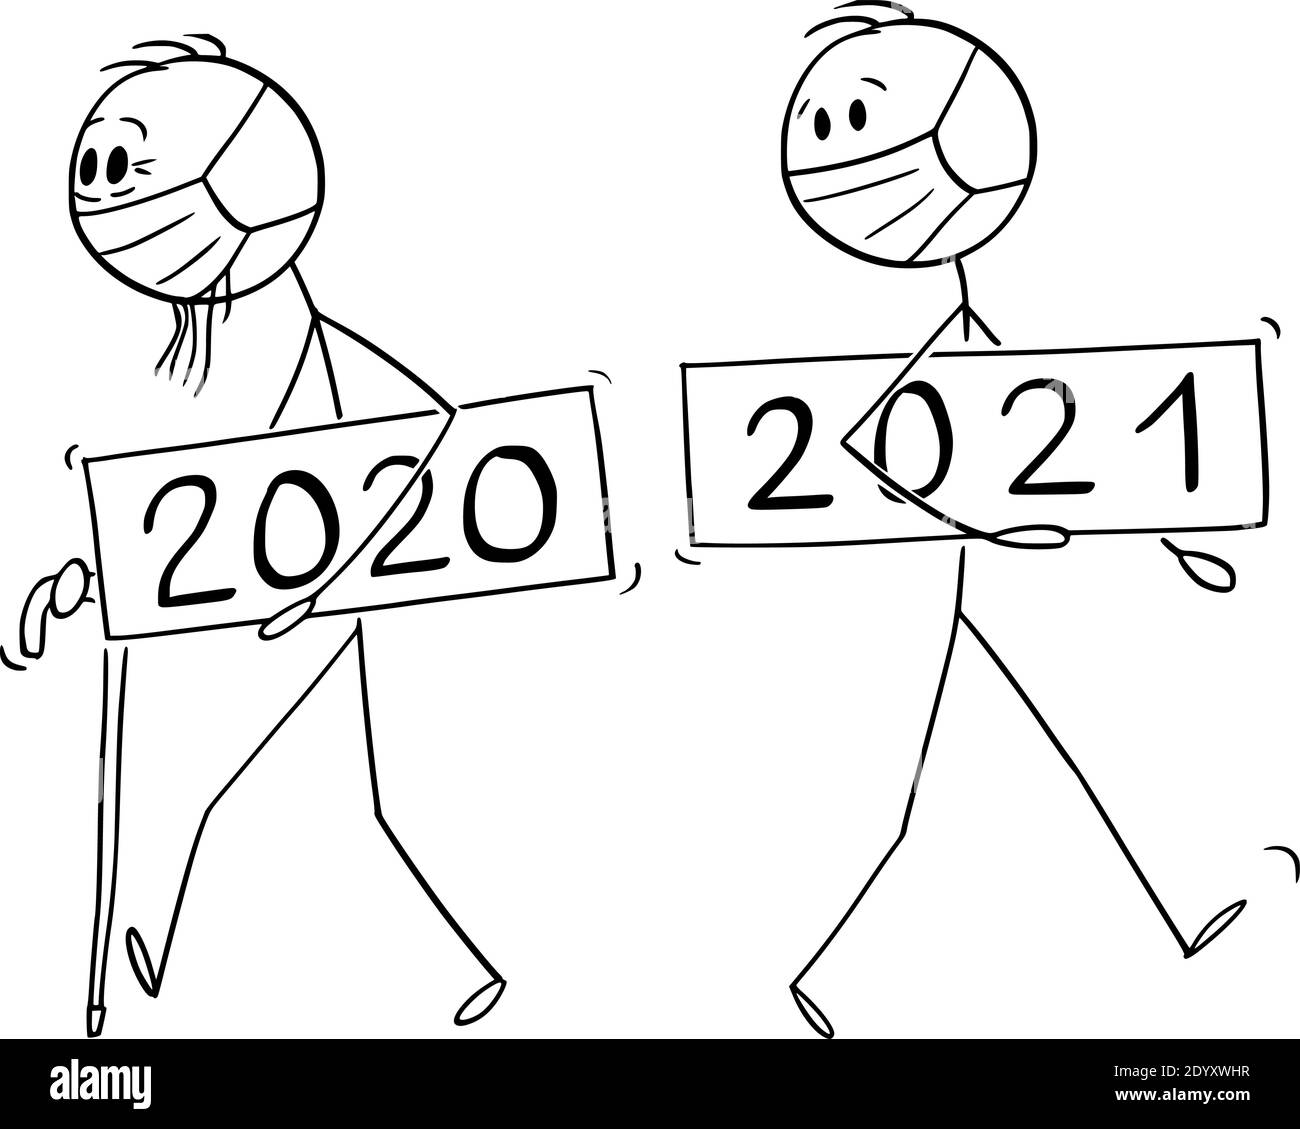 Vector cartoon stick figure illustration of old man year 2020 is leaving, new year 2021 is incoming. Both wearing coronavirus covid-19 protective face mask. Epidemic or pandemic concept. Stock Vector